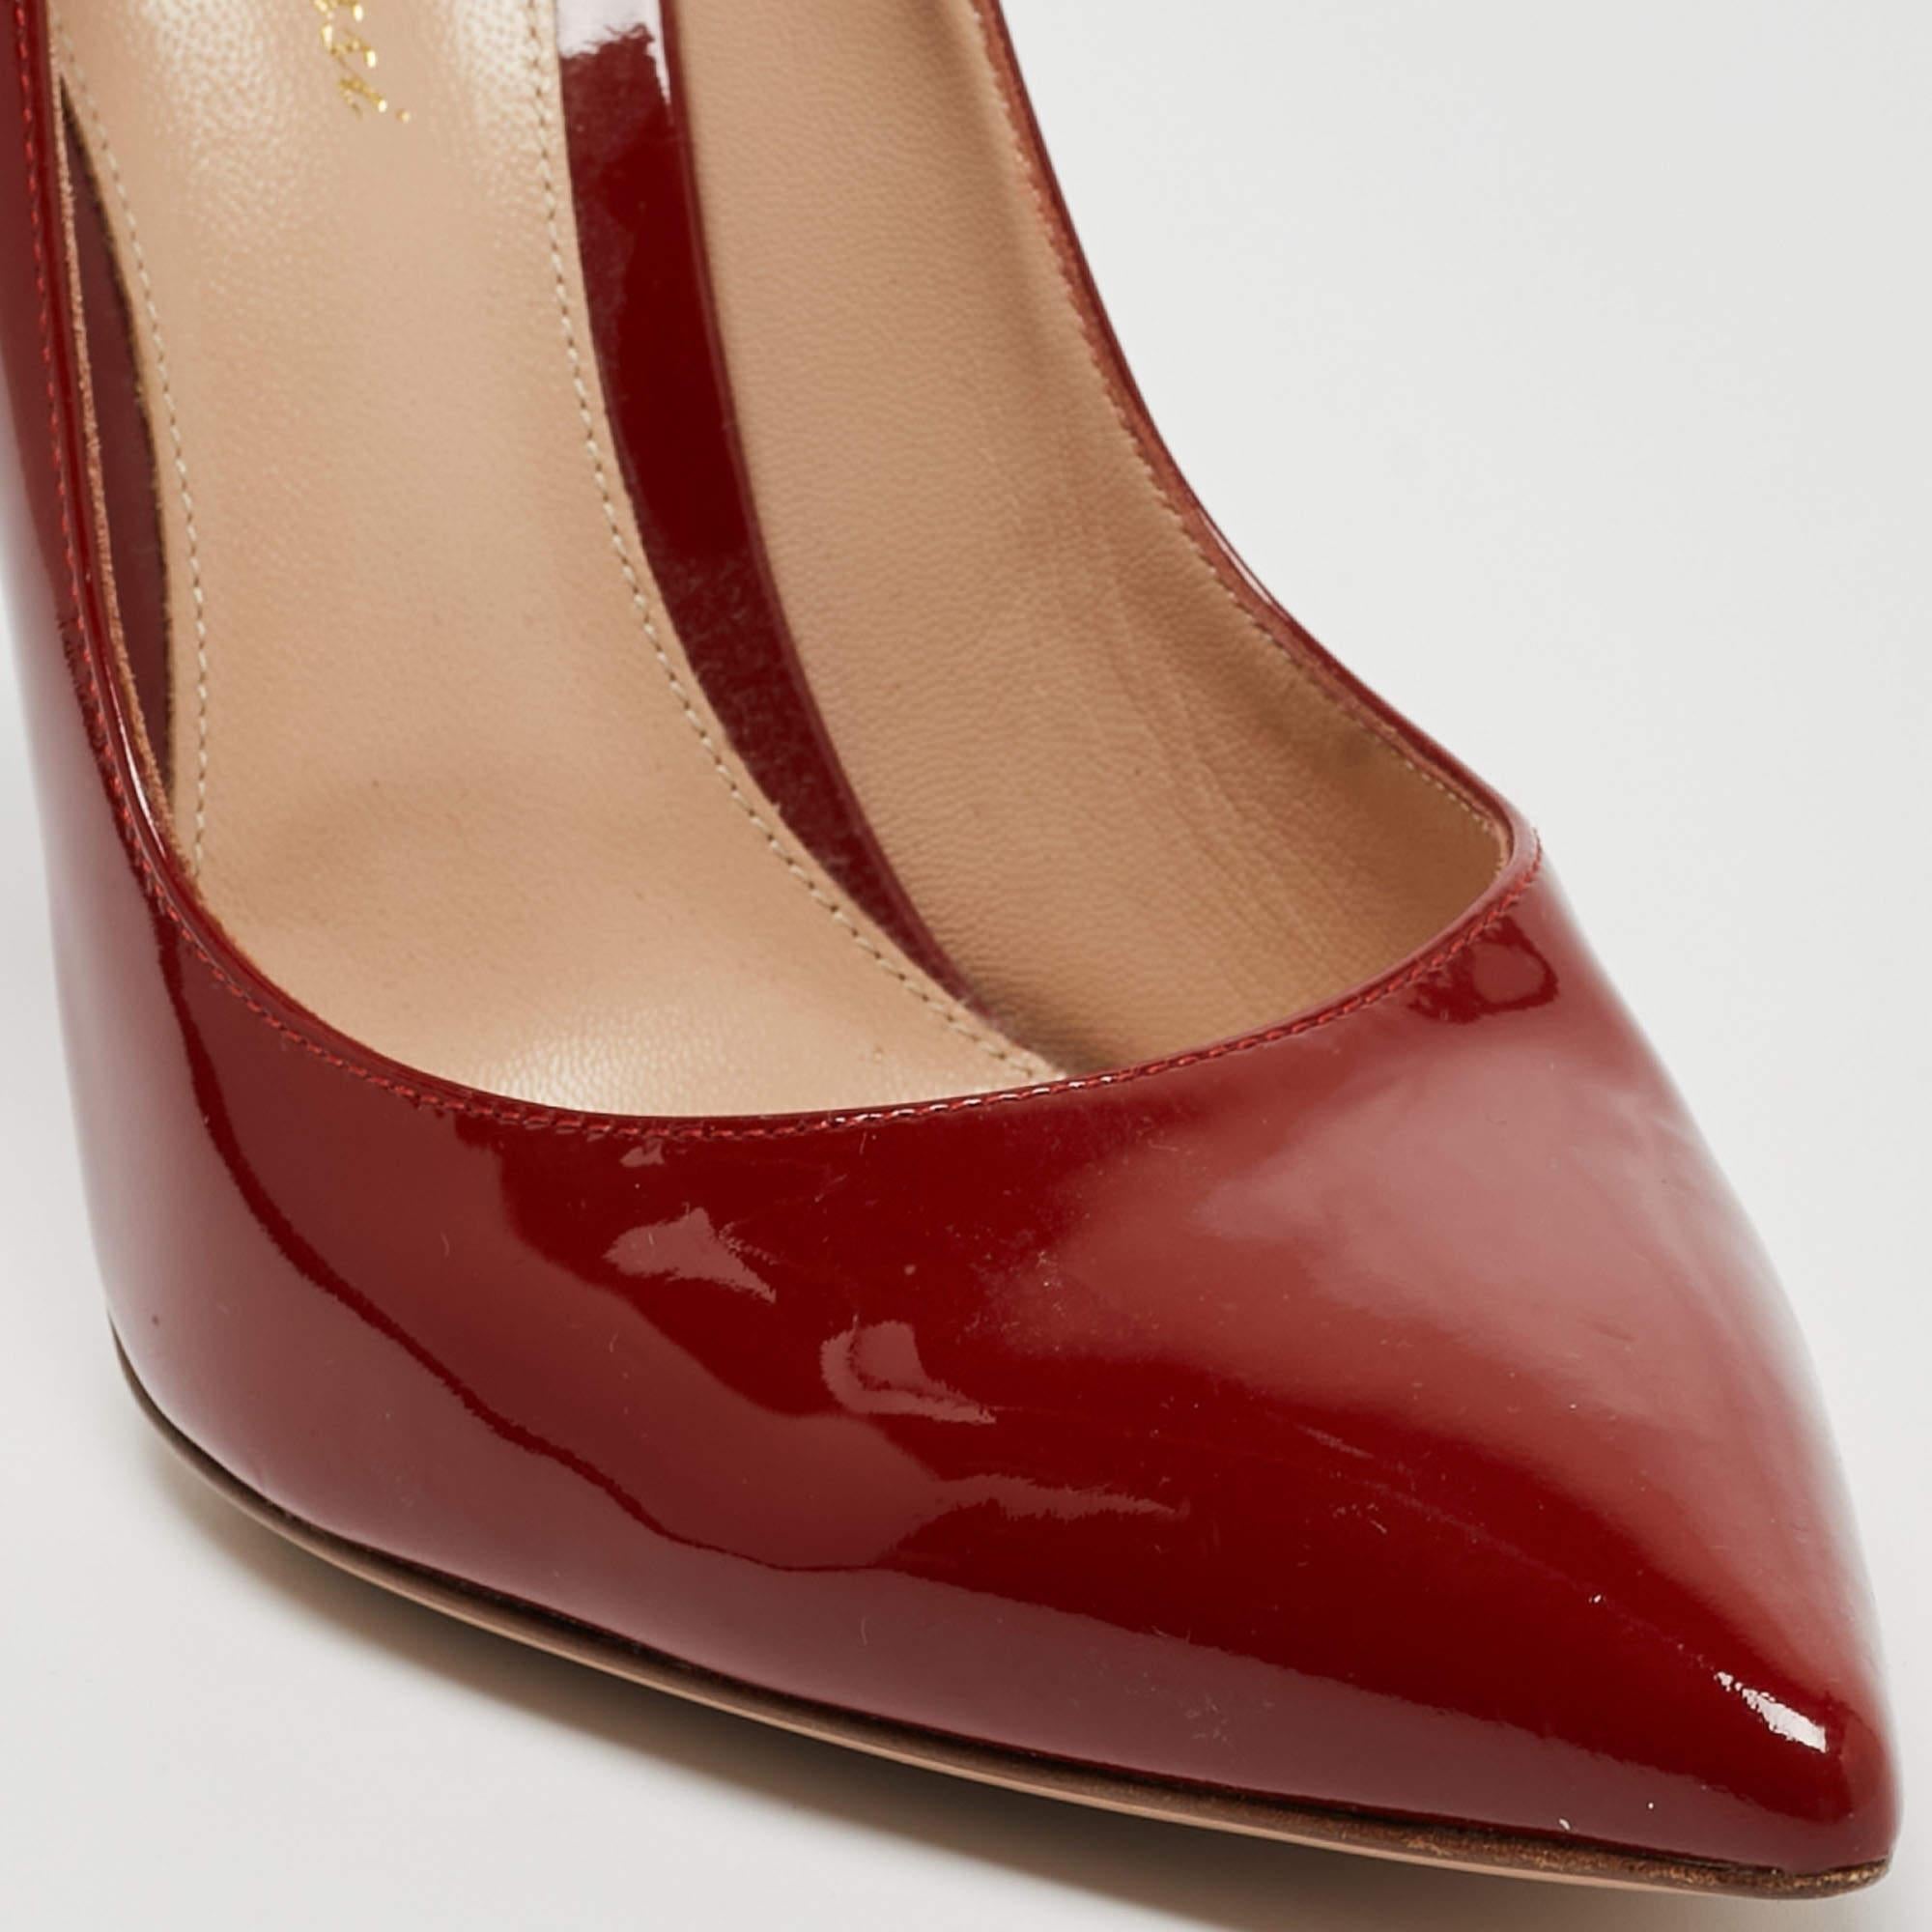 Gianvito Rossi Dark Red Patent Leather Pointed Toe Pumps Size 41 2